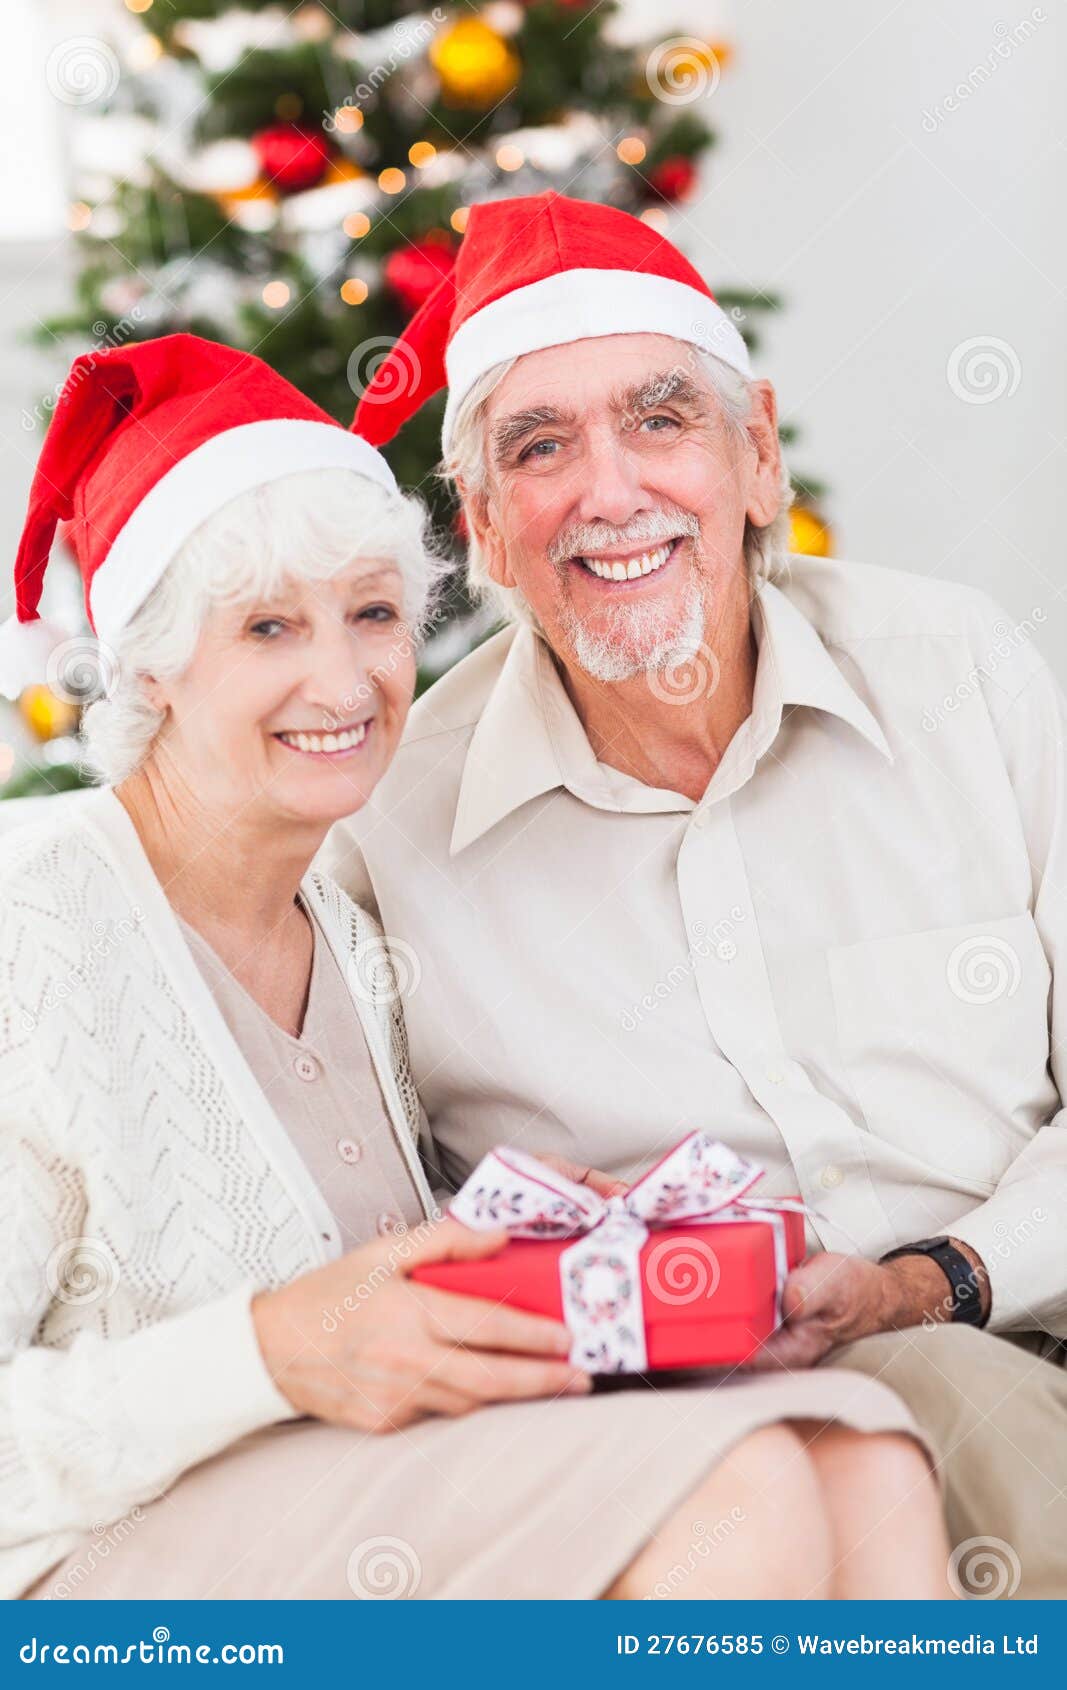 Smiling Old Couple Swapping Christ